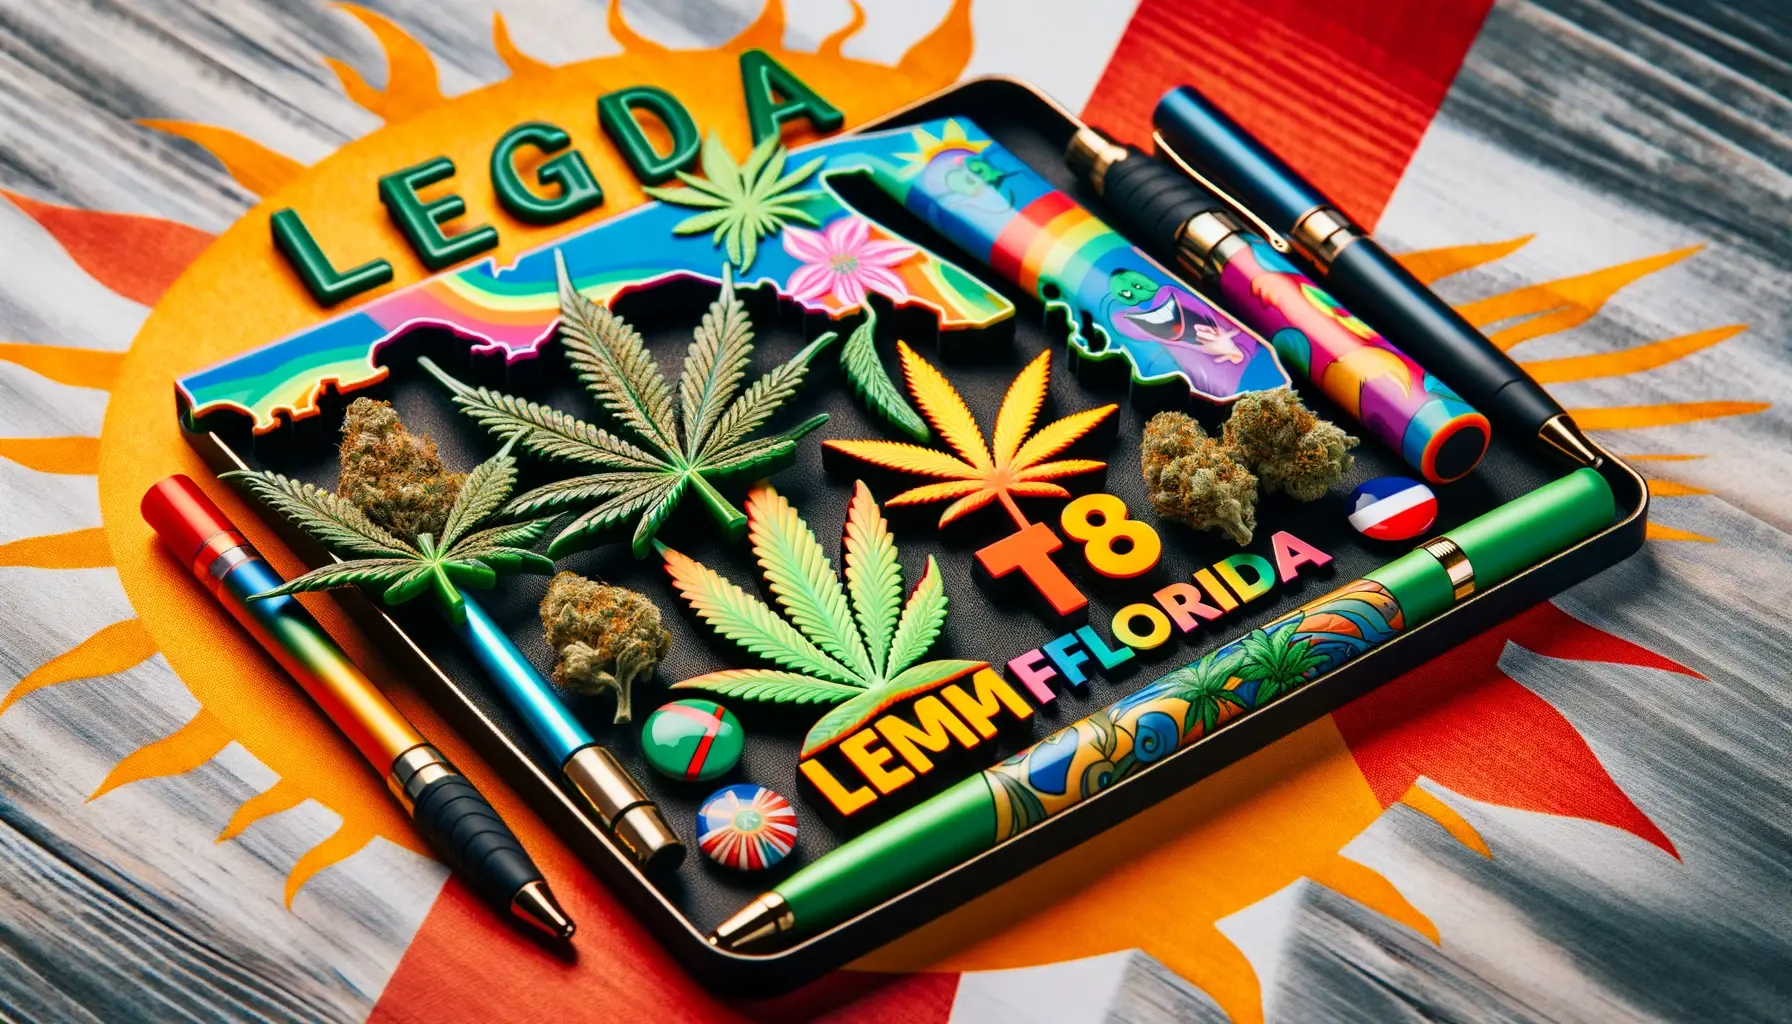 delta 8 THC pens in Florida, highlighting legality and hemp plants, with vibrant colors and a legal theme, including elements representing Florida like sunshine, palm trees